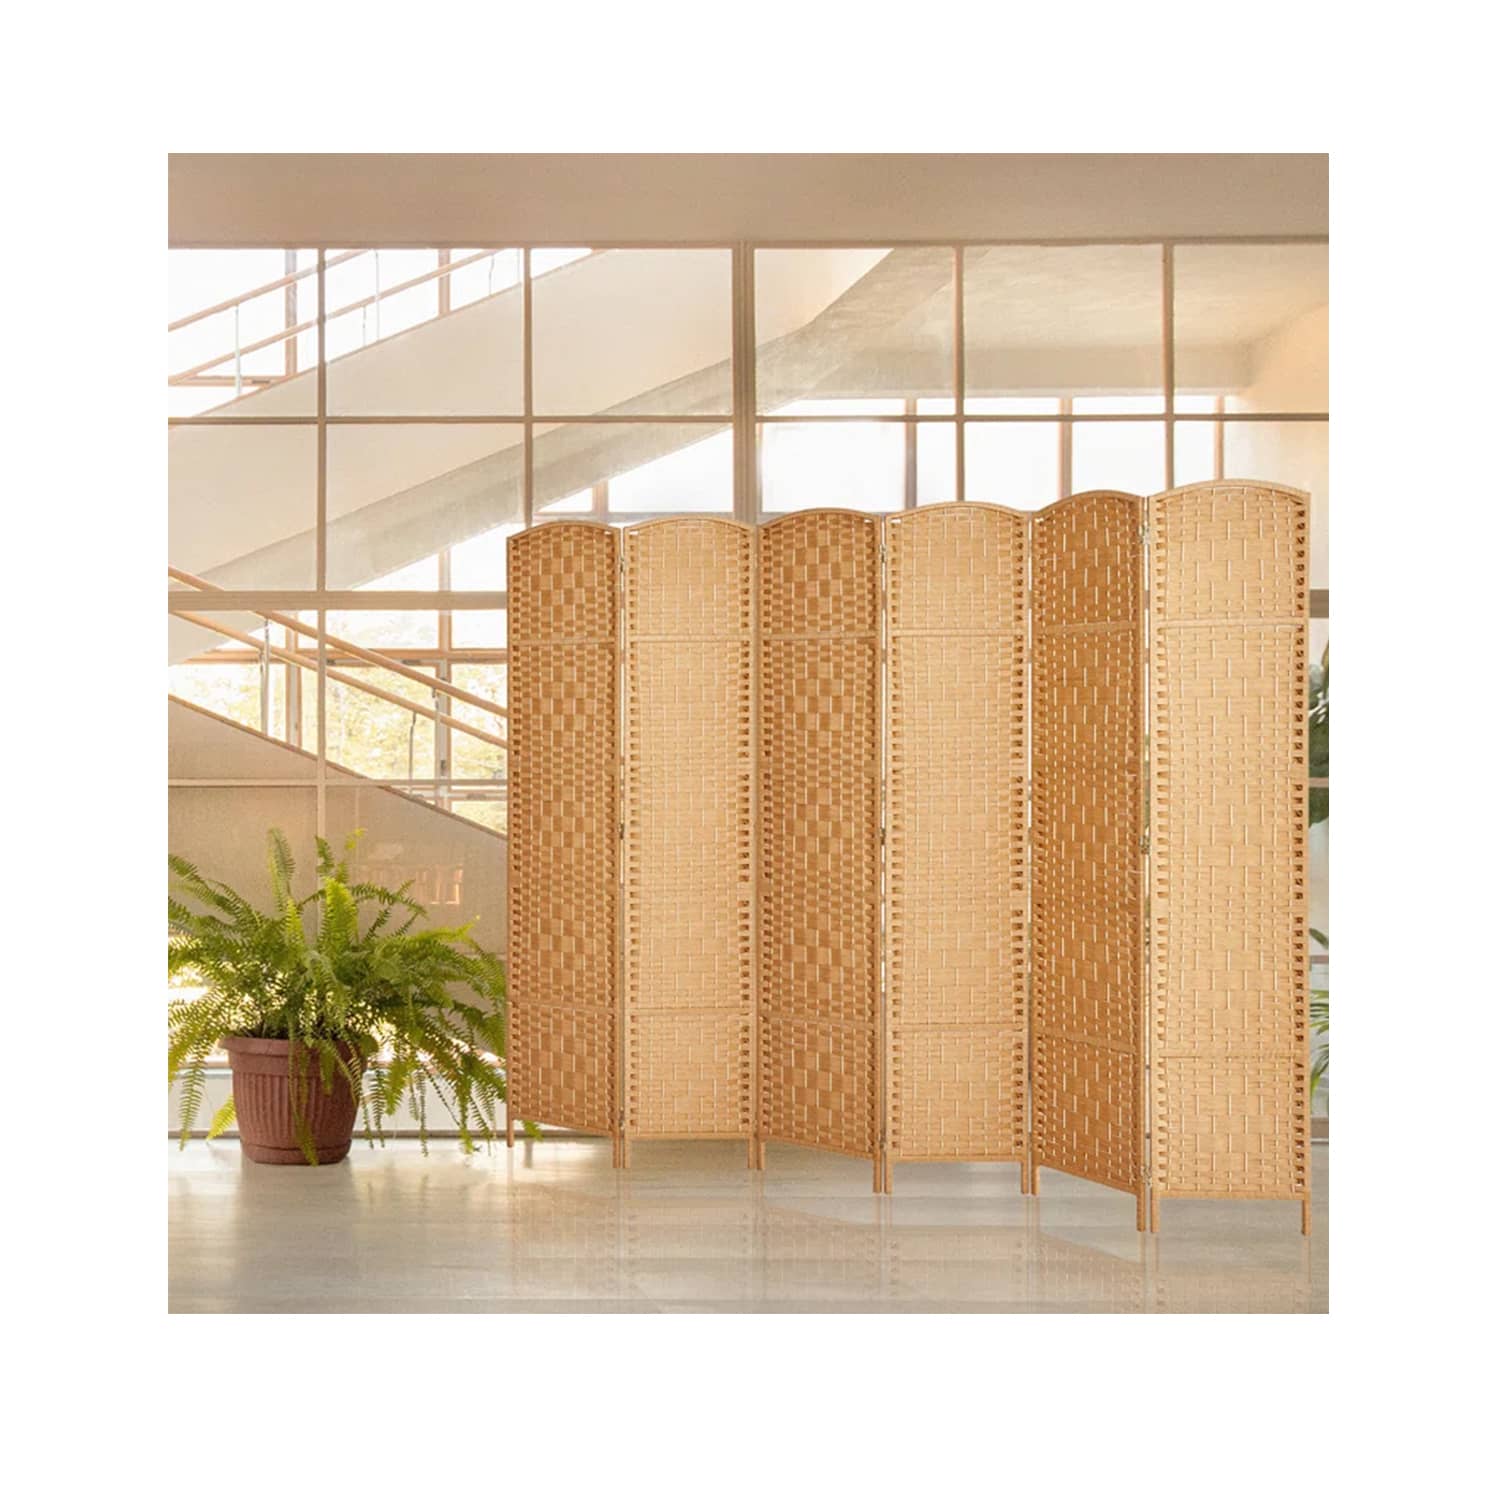 https://cdn.apartmenttherapy.info/image/upload/v1693585102/at/living/2023-09/studio-apartment-essentials/folding-room-divider-privacy-screen.jpg